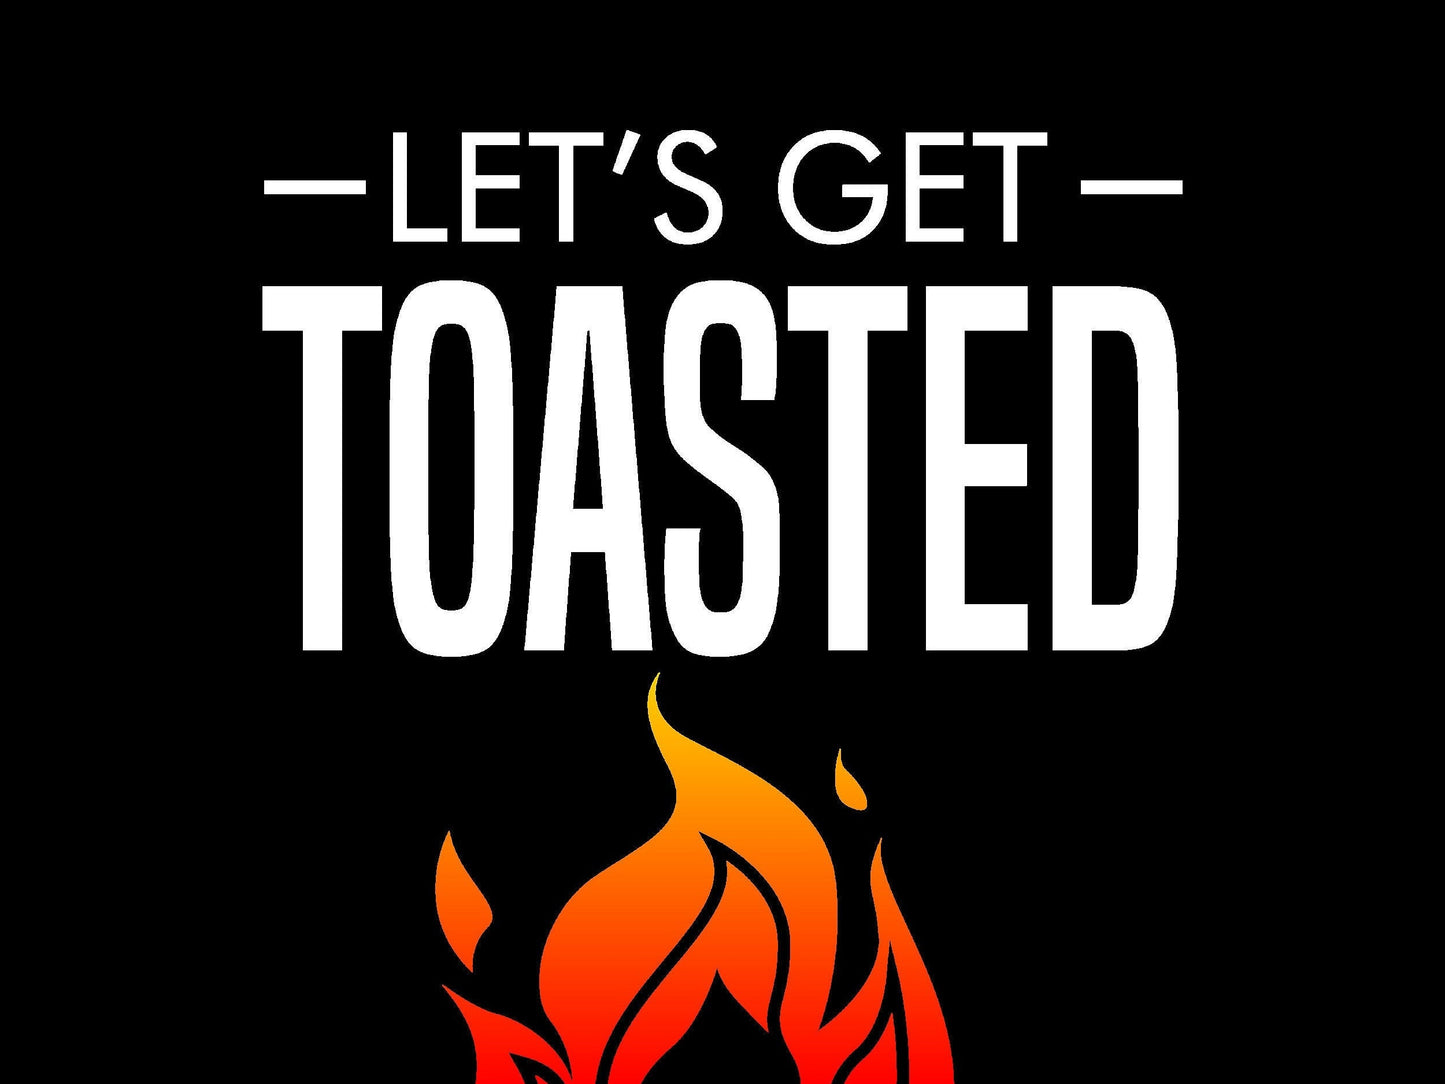 Let's get toasted